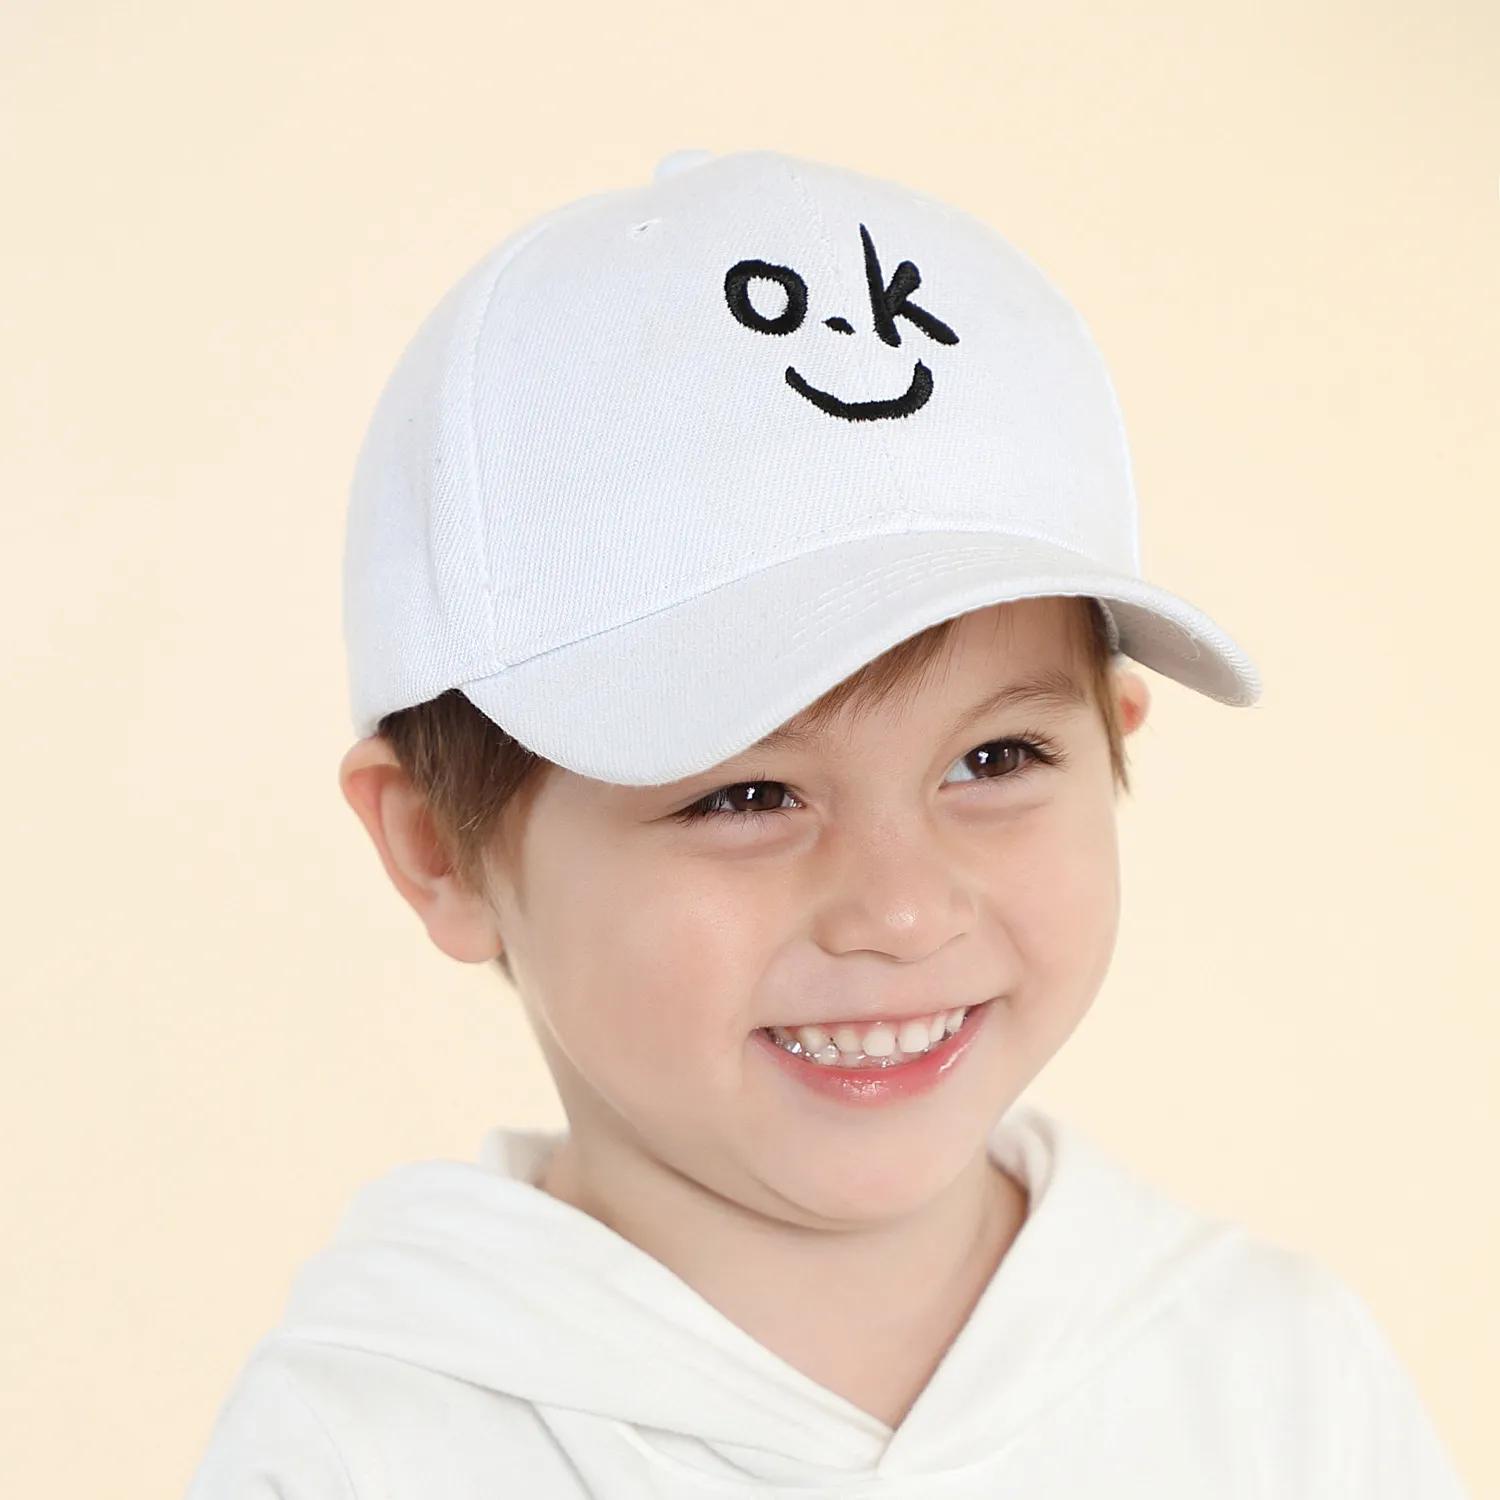 Fashion Embroidery Baseball Cap Kids Summer Boys Girls Sunhat Cool Cute  Solid Color Hip Hop Hat Outdoor Sports Travel School Sun Hats From  Rsgfashions, $3.9